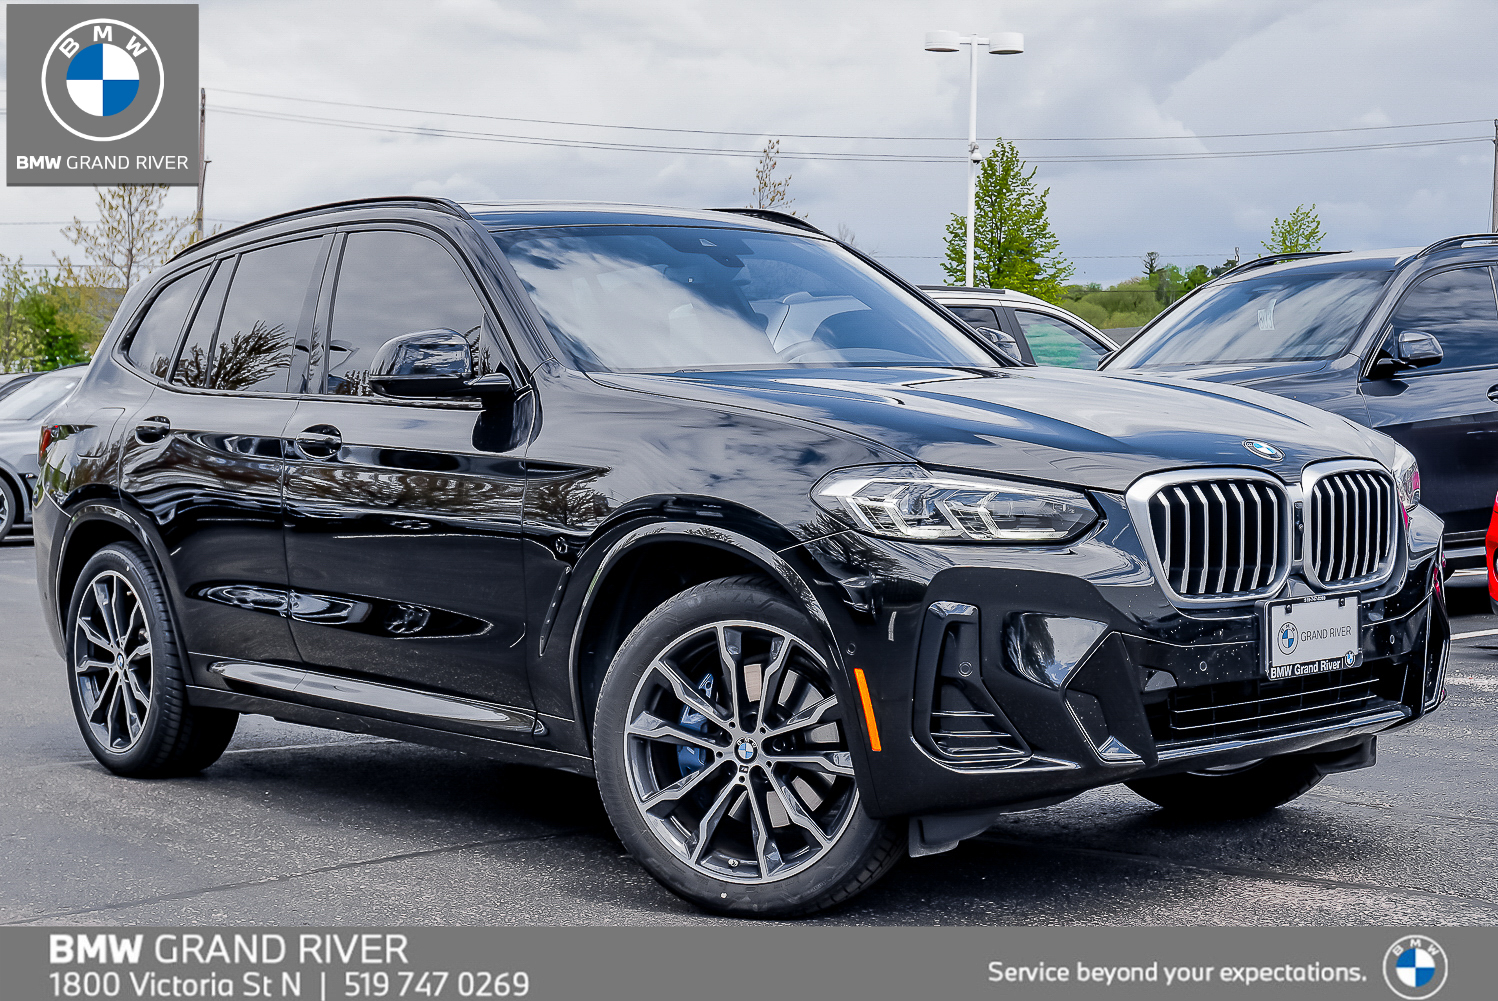 2023 BMW X3 JUST ARRIVED | PICTURES TO COME SOON |